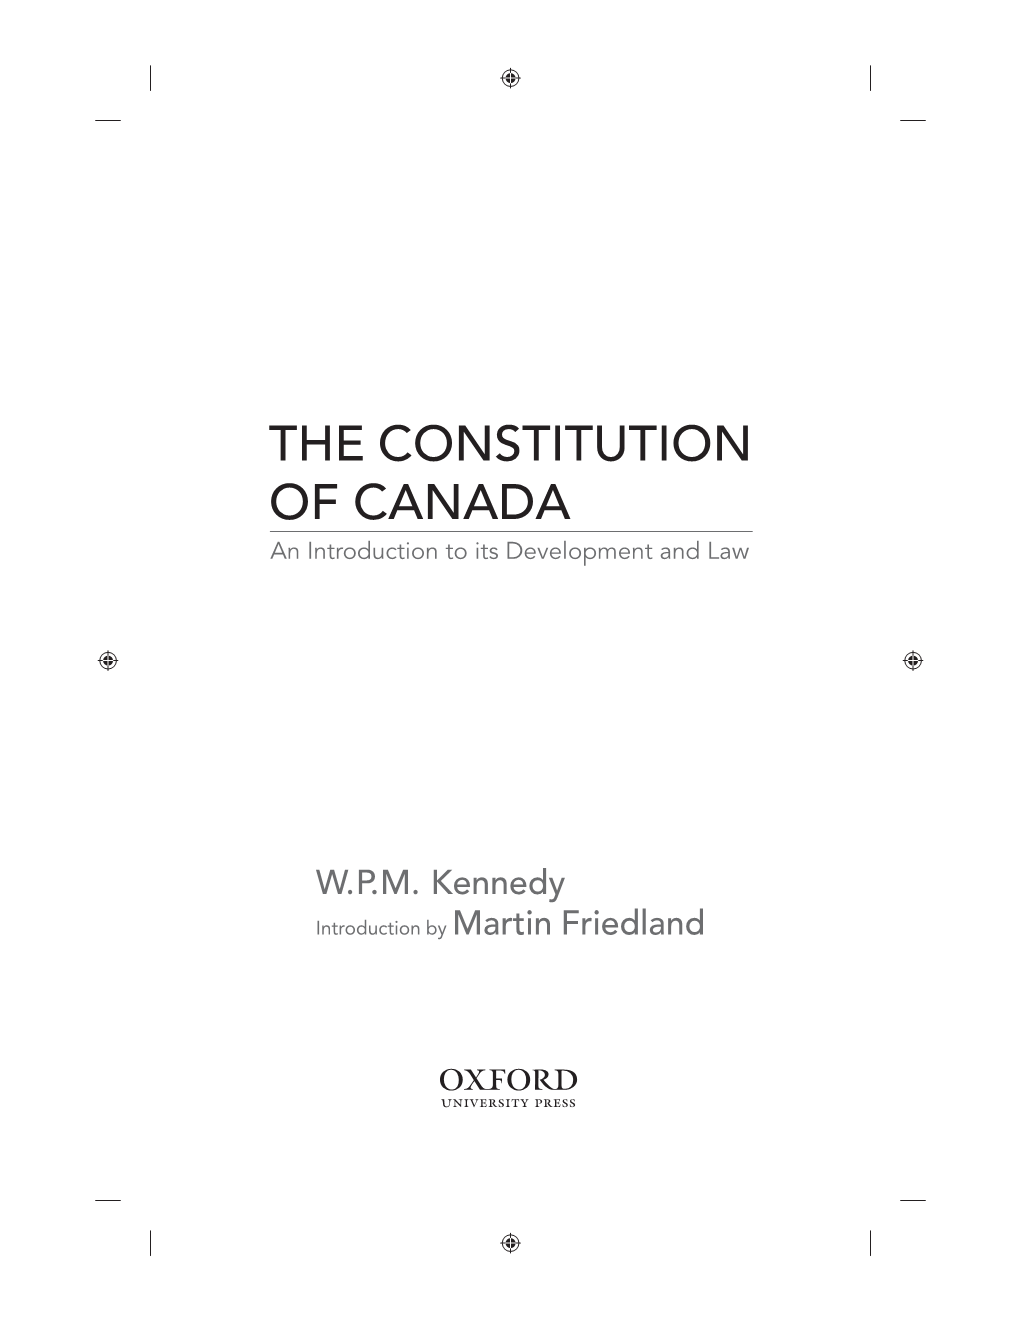 THE CONSTITUTION of CANADA an Introduction to Its Development and Law